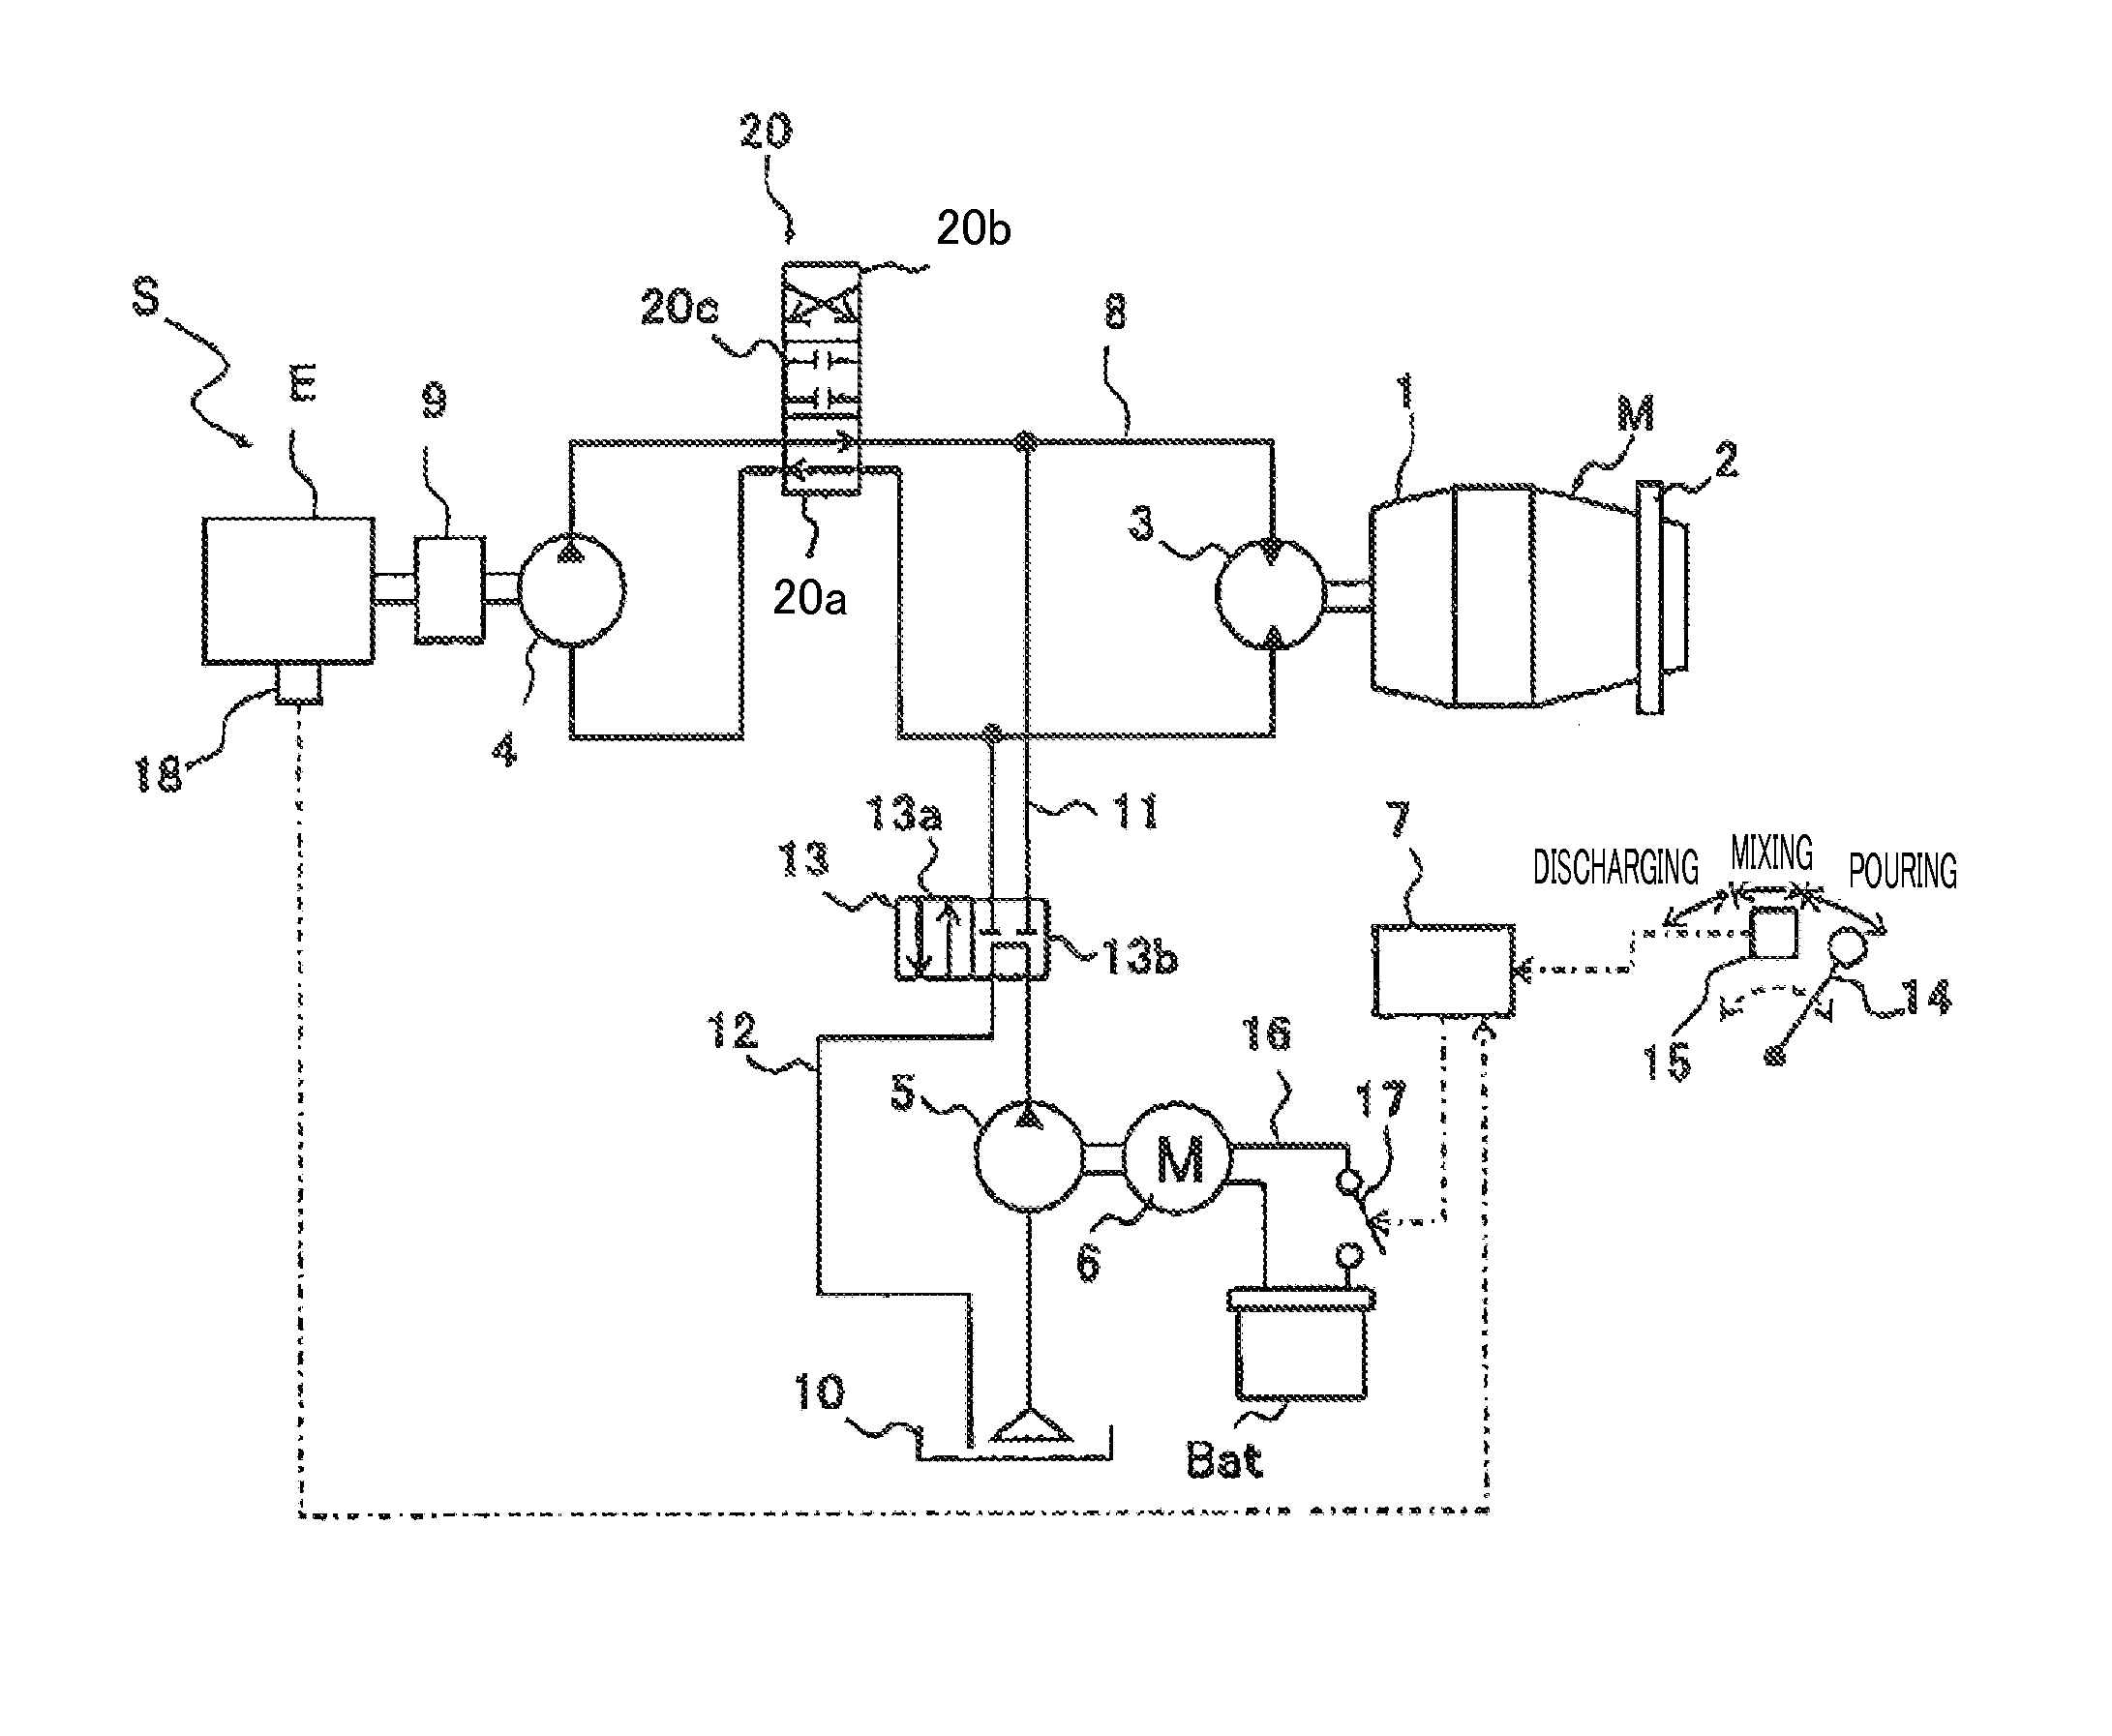 Mixer drum driving device with an auxiliary hydraulic pump to rotate a mixer drum